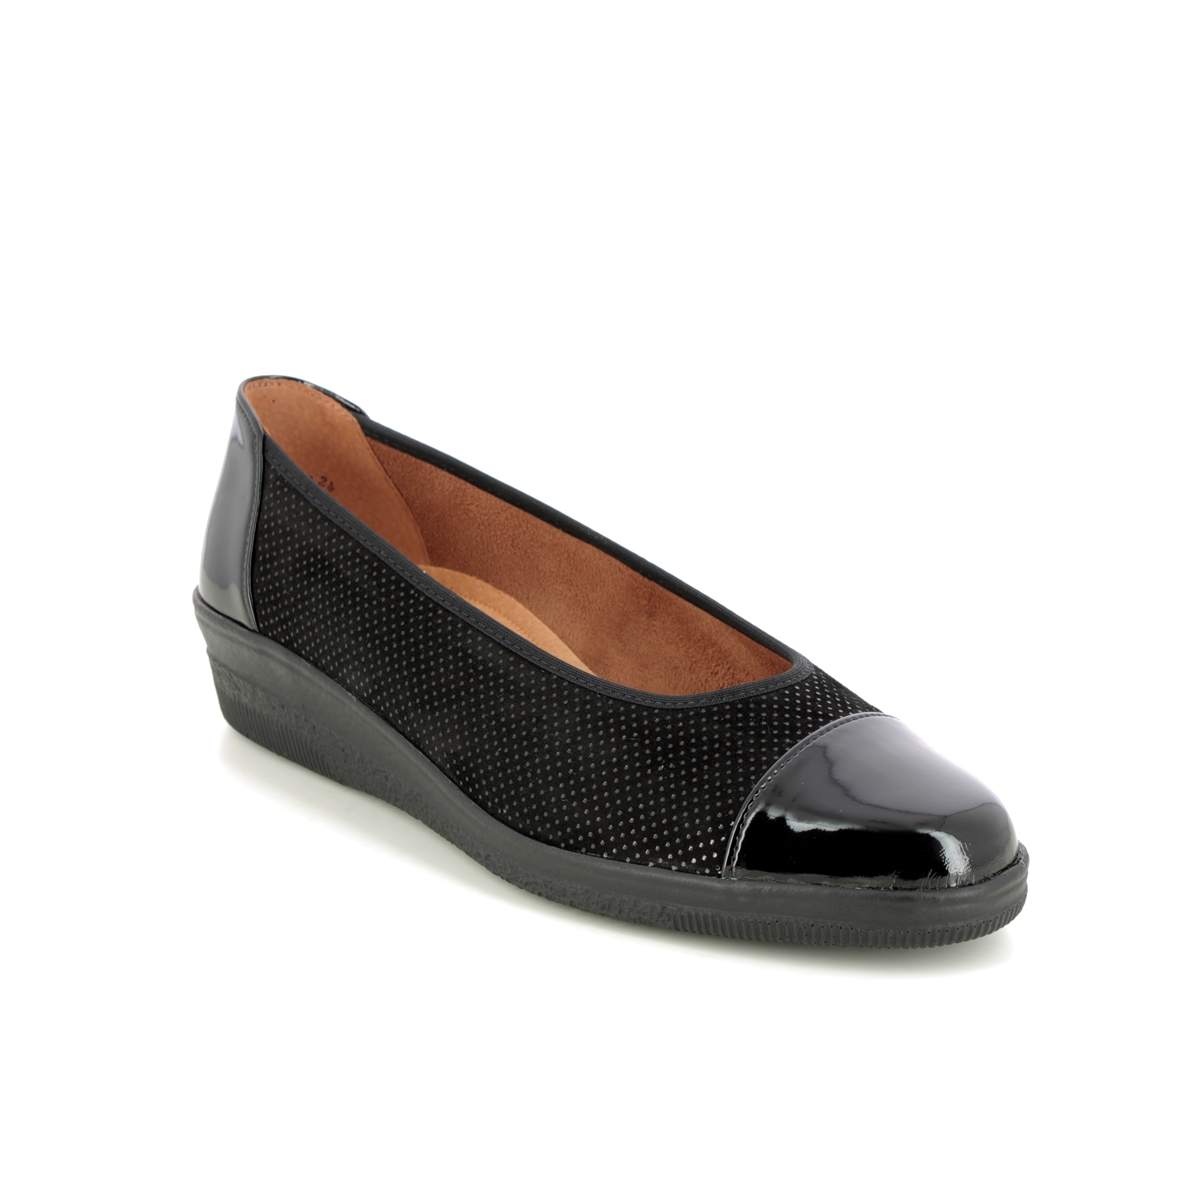 Gabor Petunia Black patent Womens Comfort Slip On Shoes 06.402.87 in a Plain Leather and Man-made in Size 3